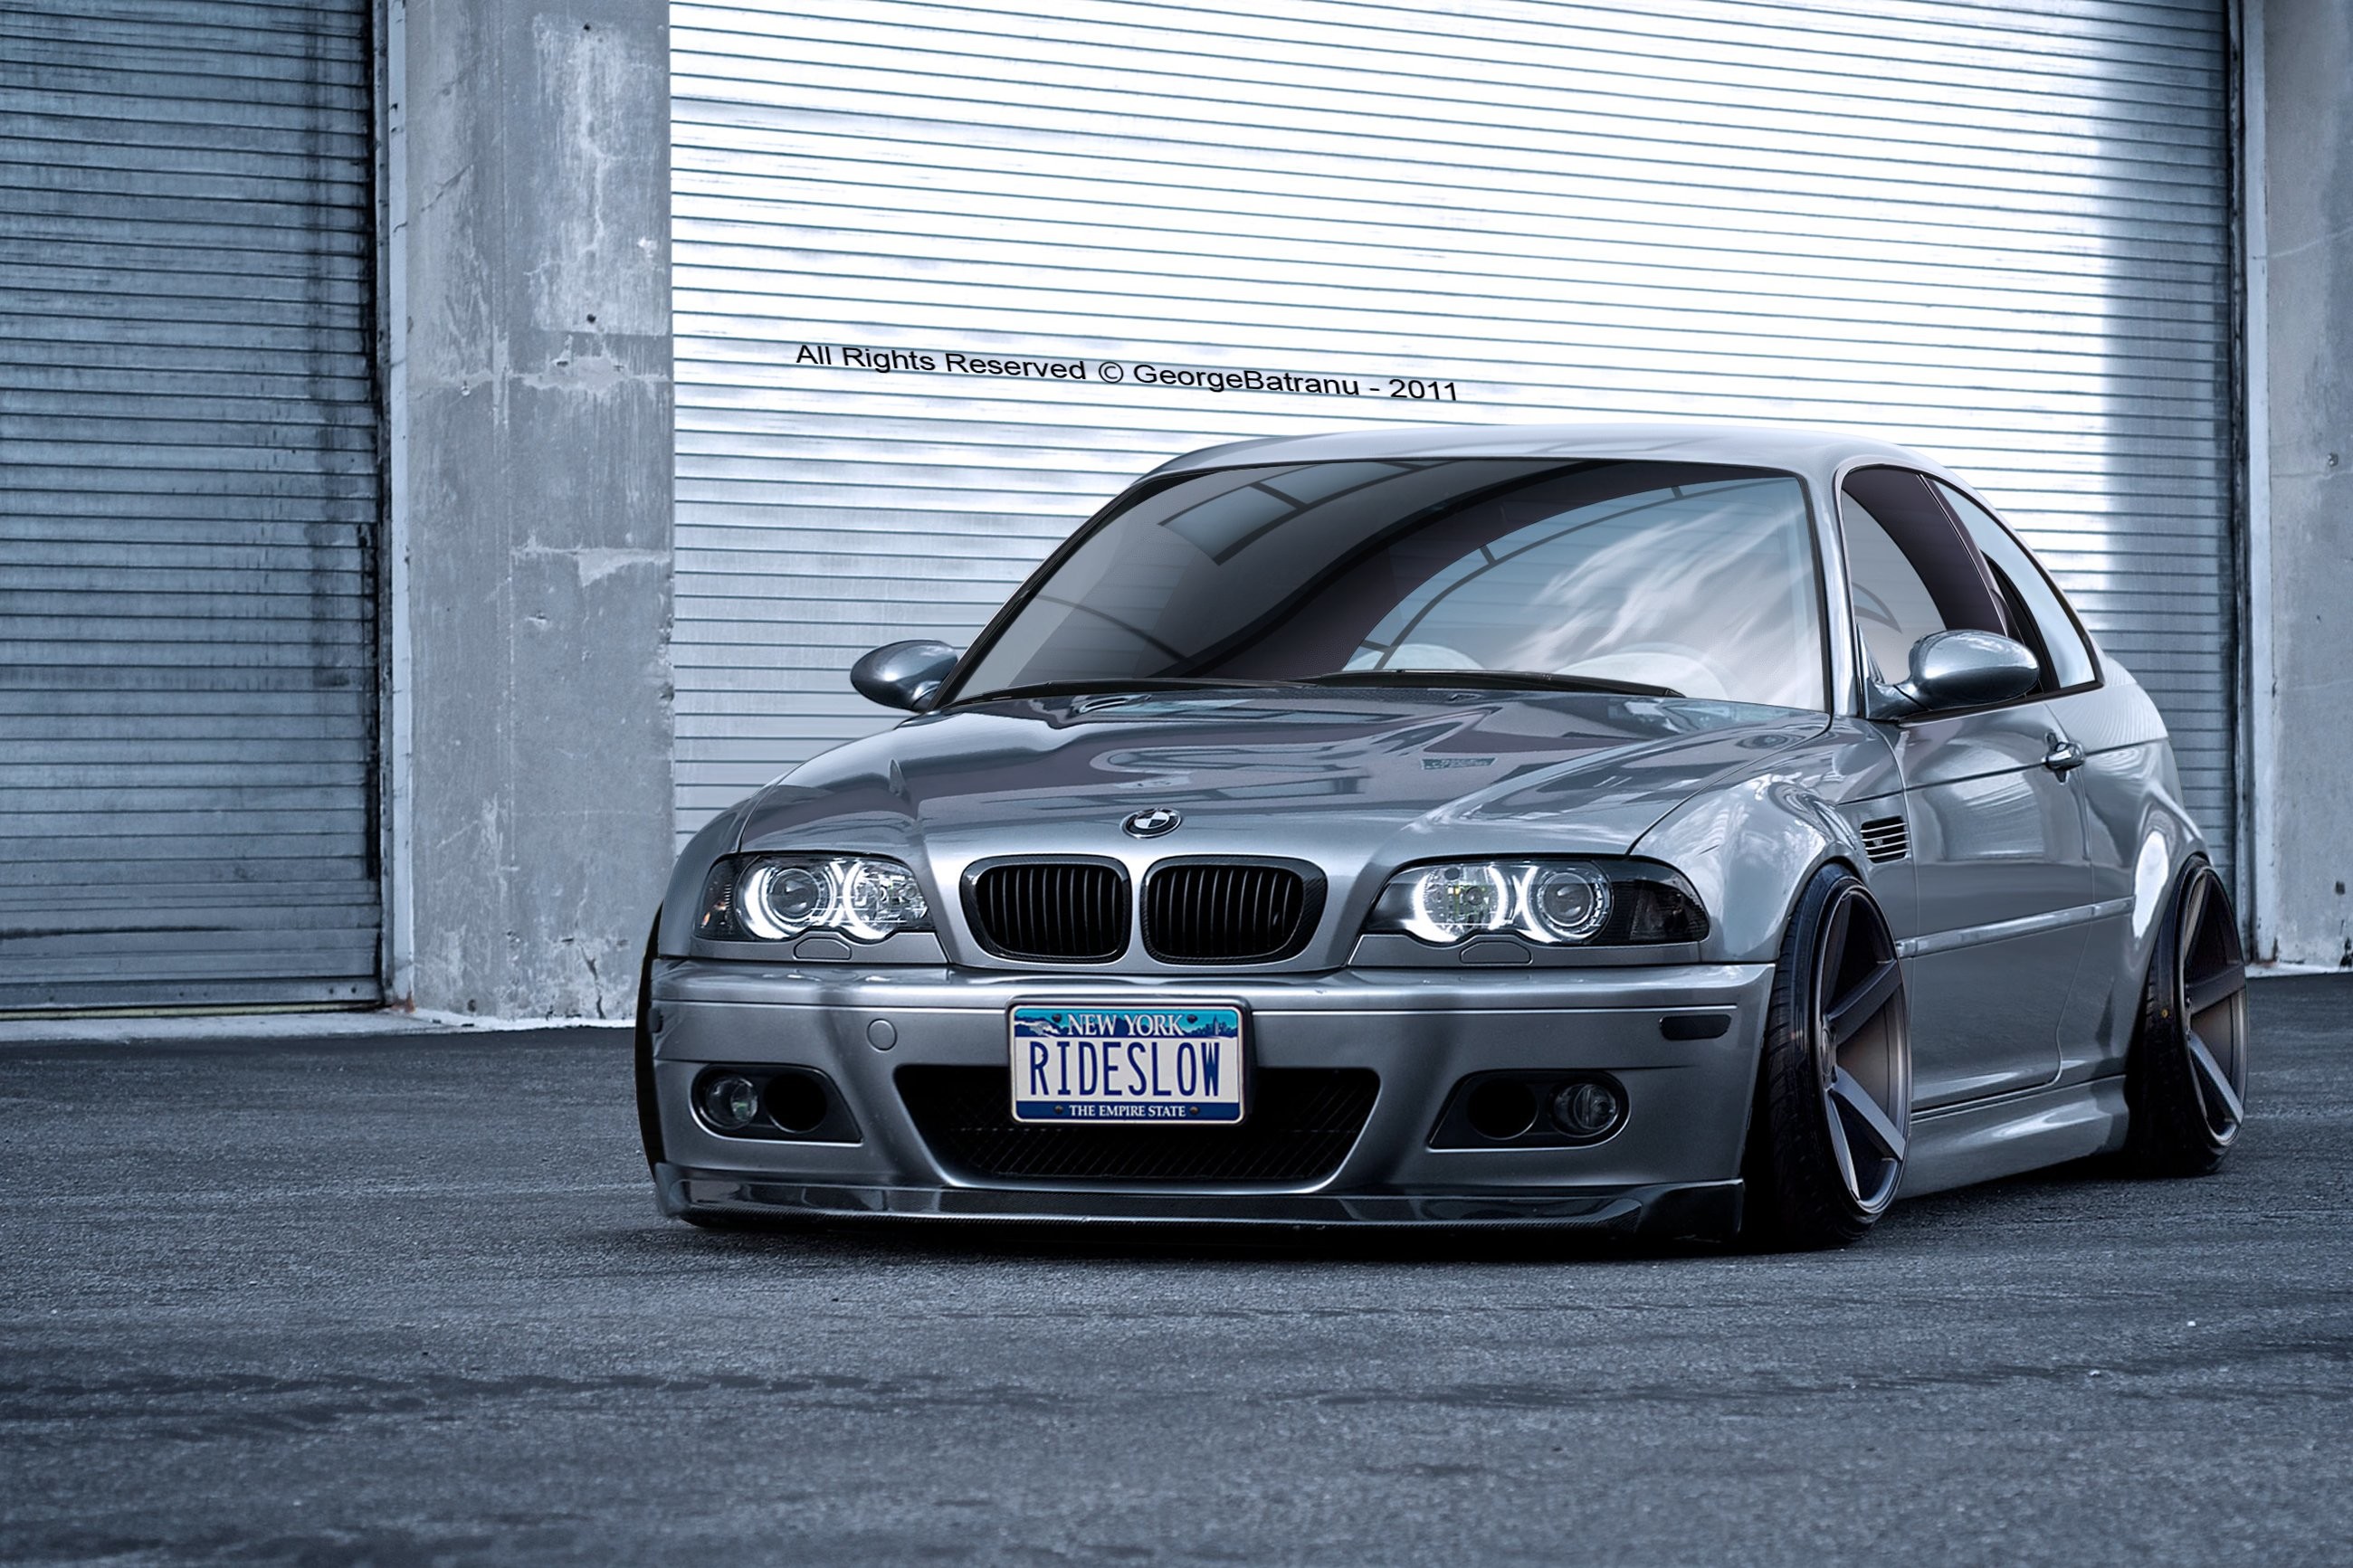 Bmw E46 Pictures  Download Free Images on Unsplash